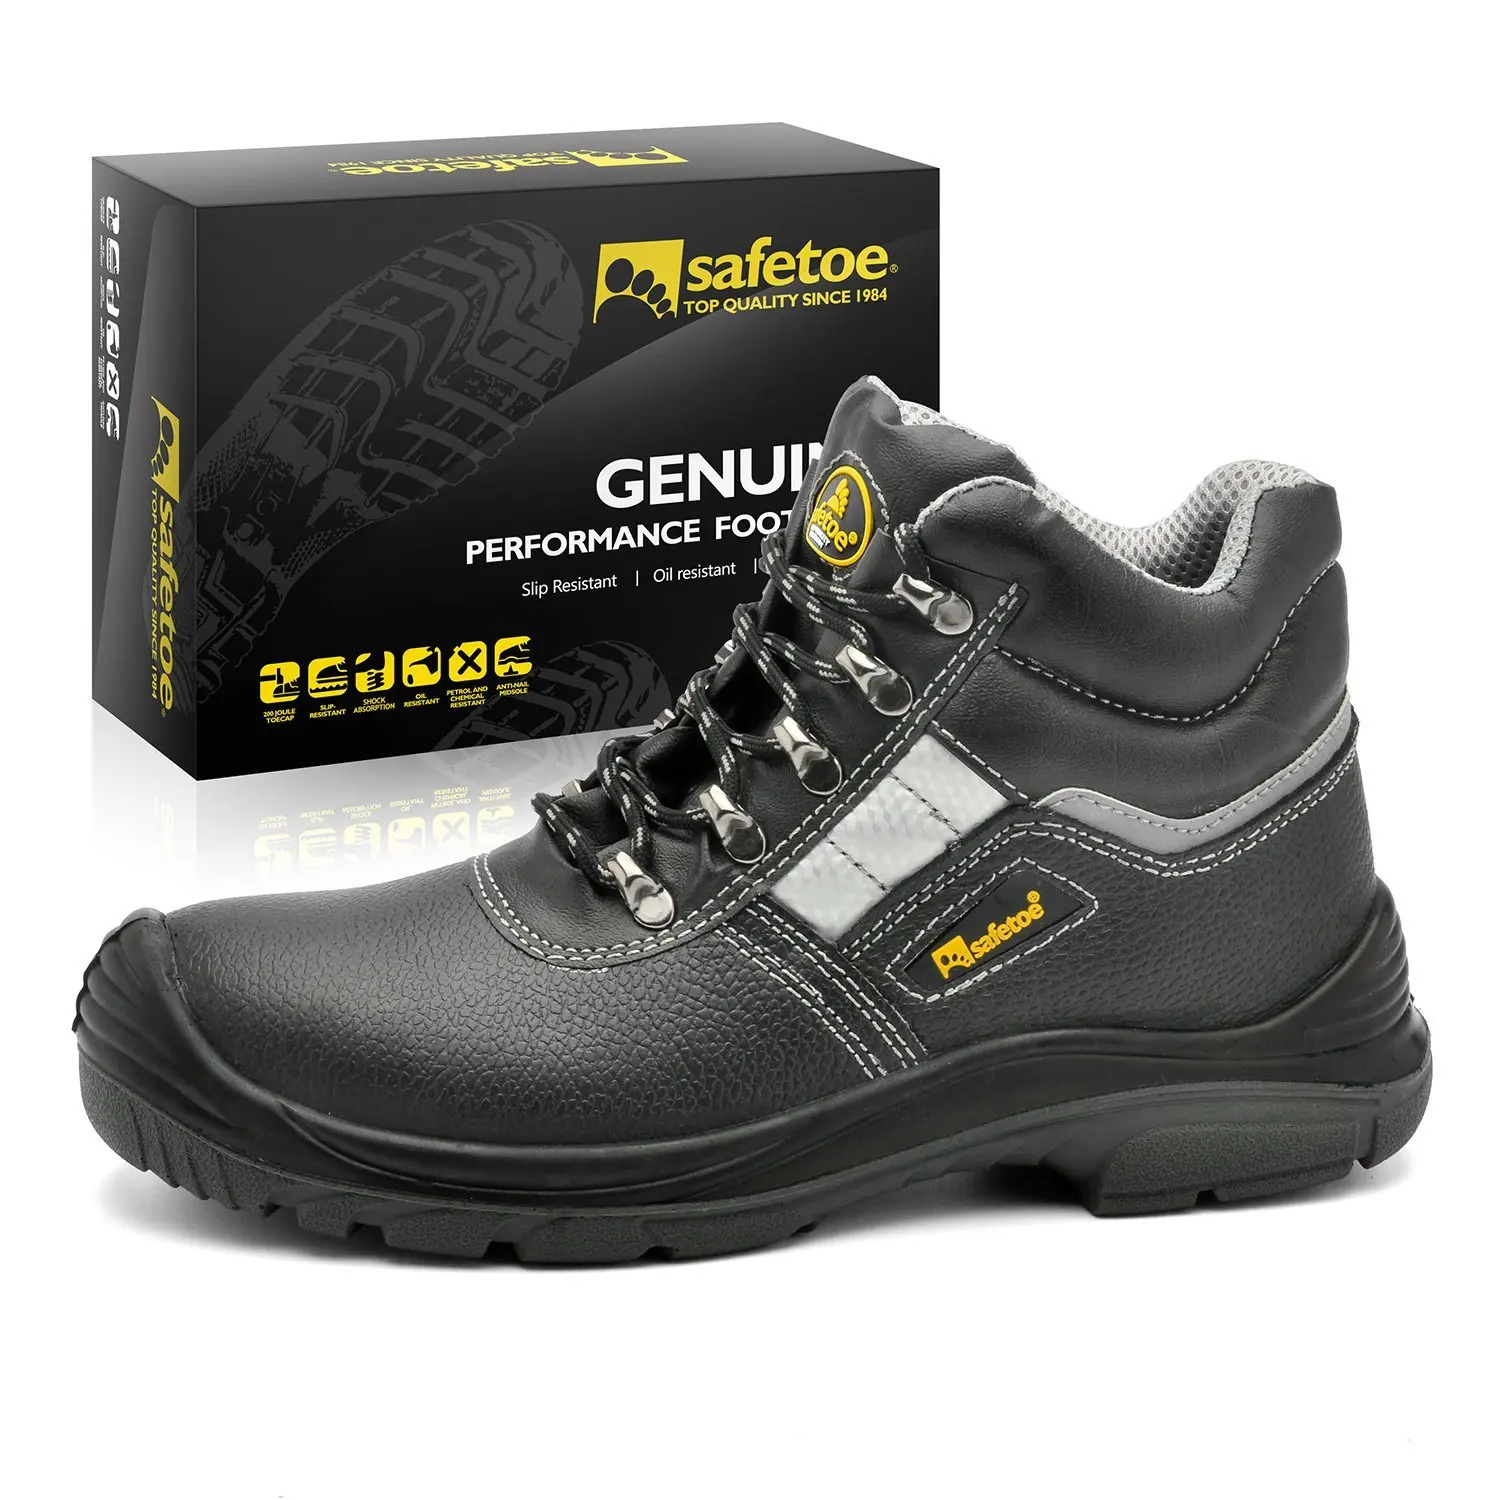 Cheap Wide Fitting Safety Boots, find 